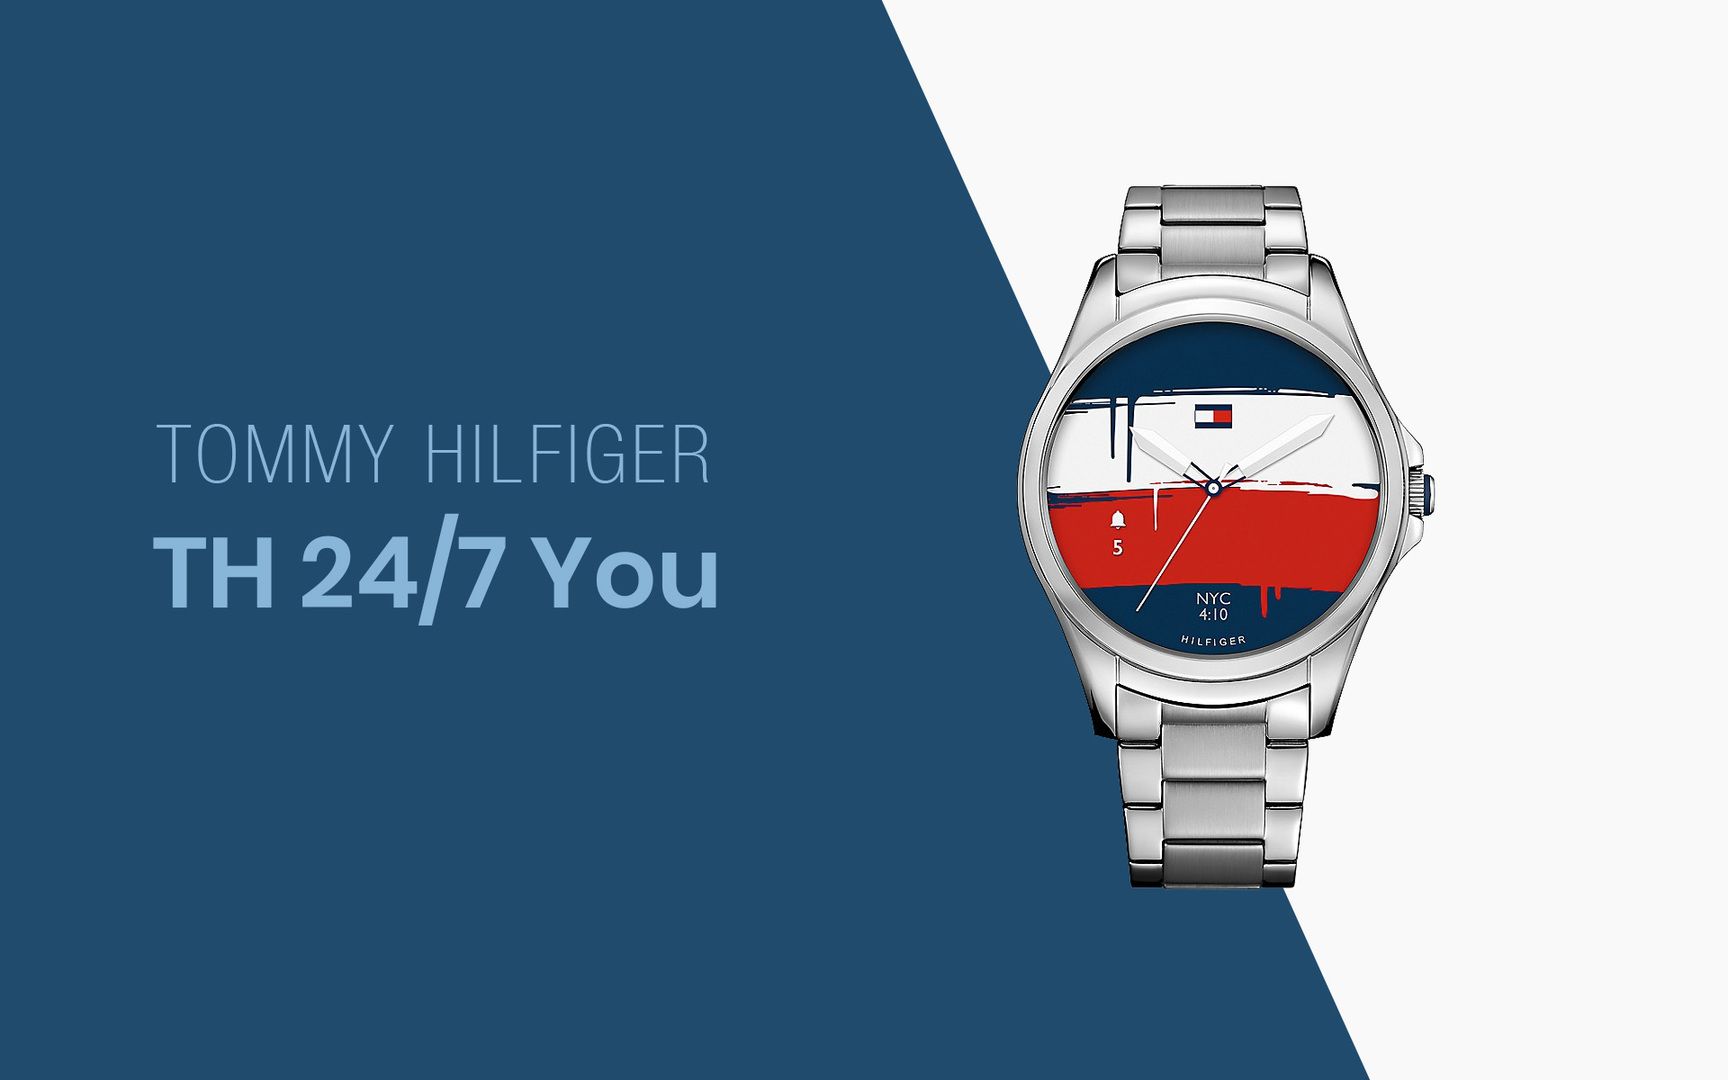 The Tommy Hilfiger TH24/7 You is an Android Wear OS Smartwatch Done Right